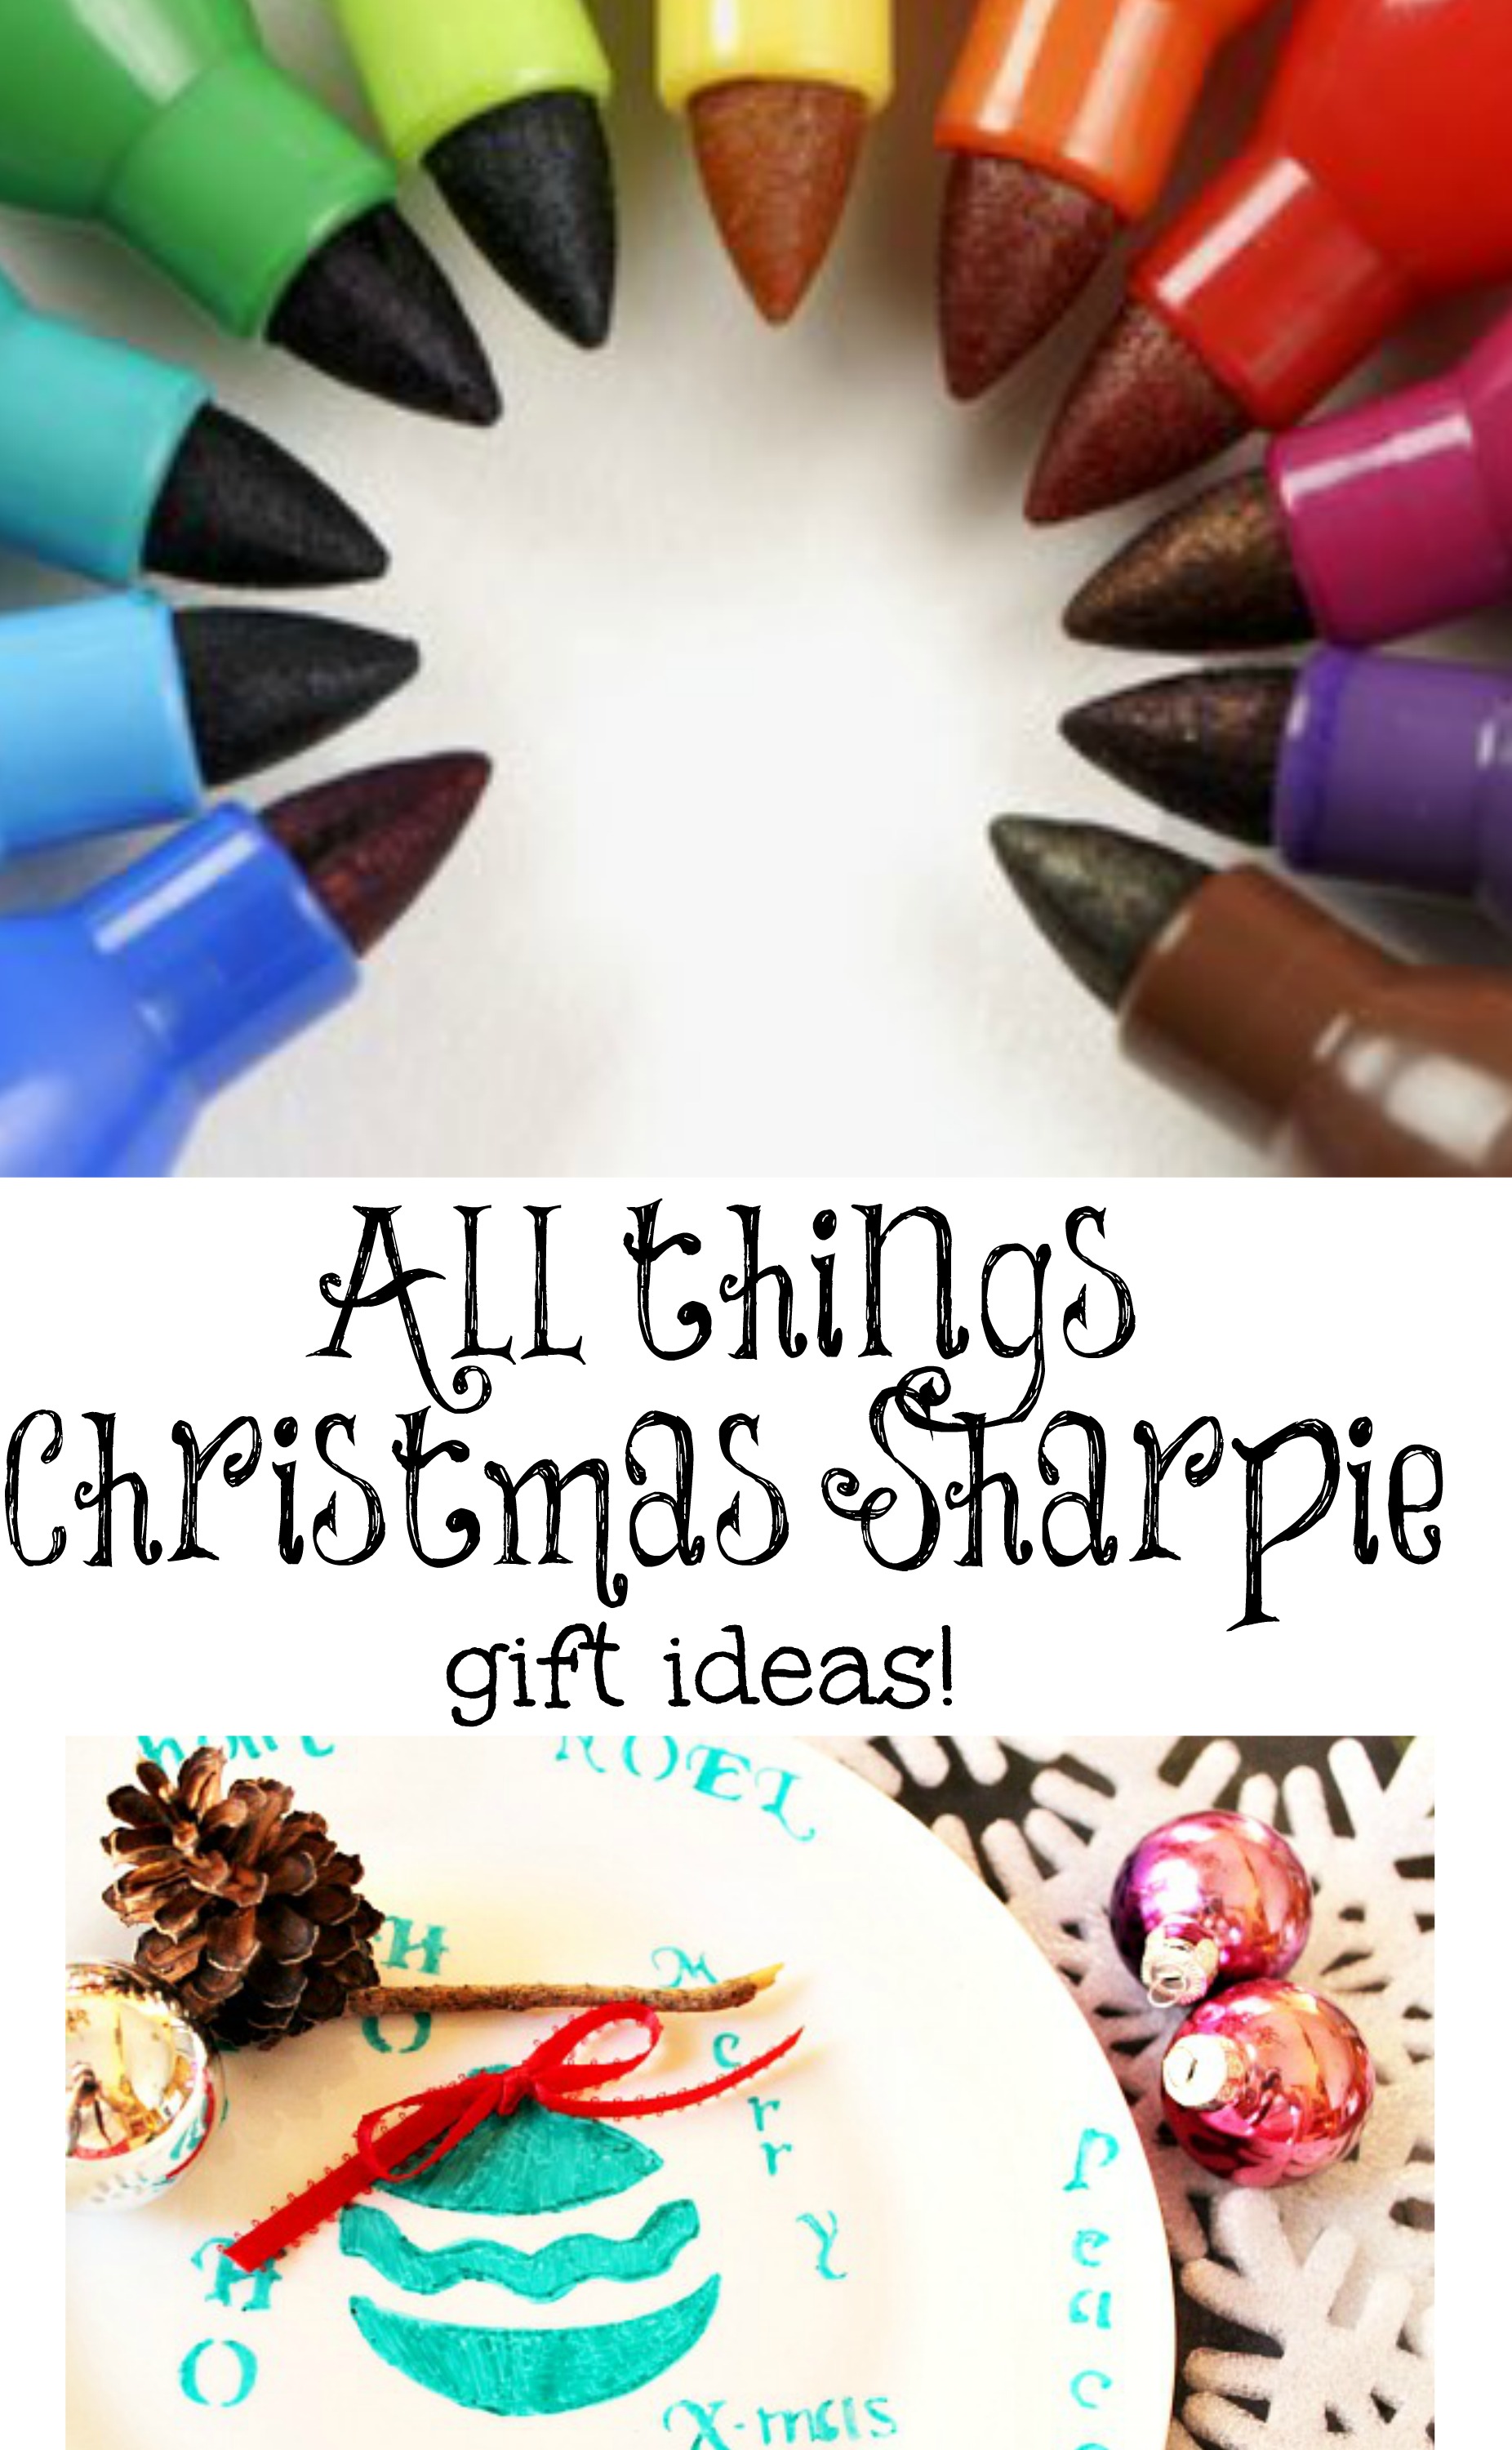 All things Christmas sharpie gift ideas